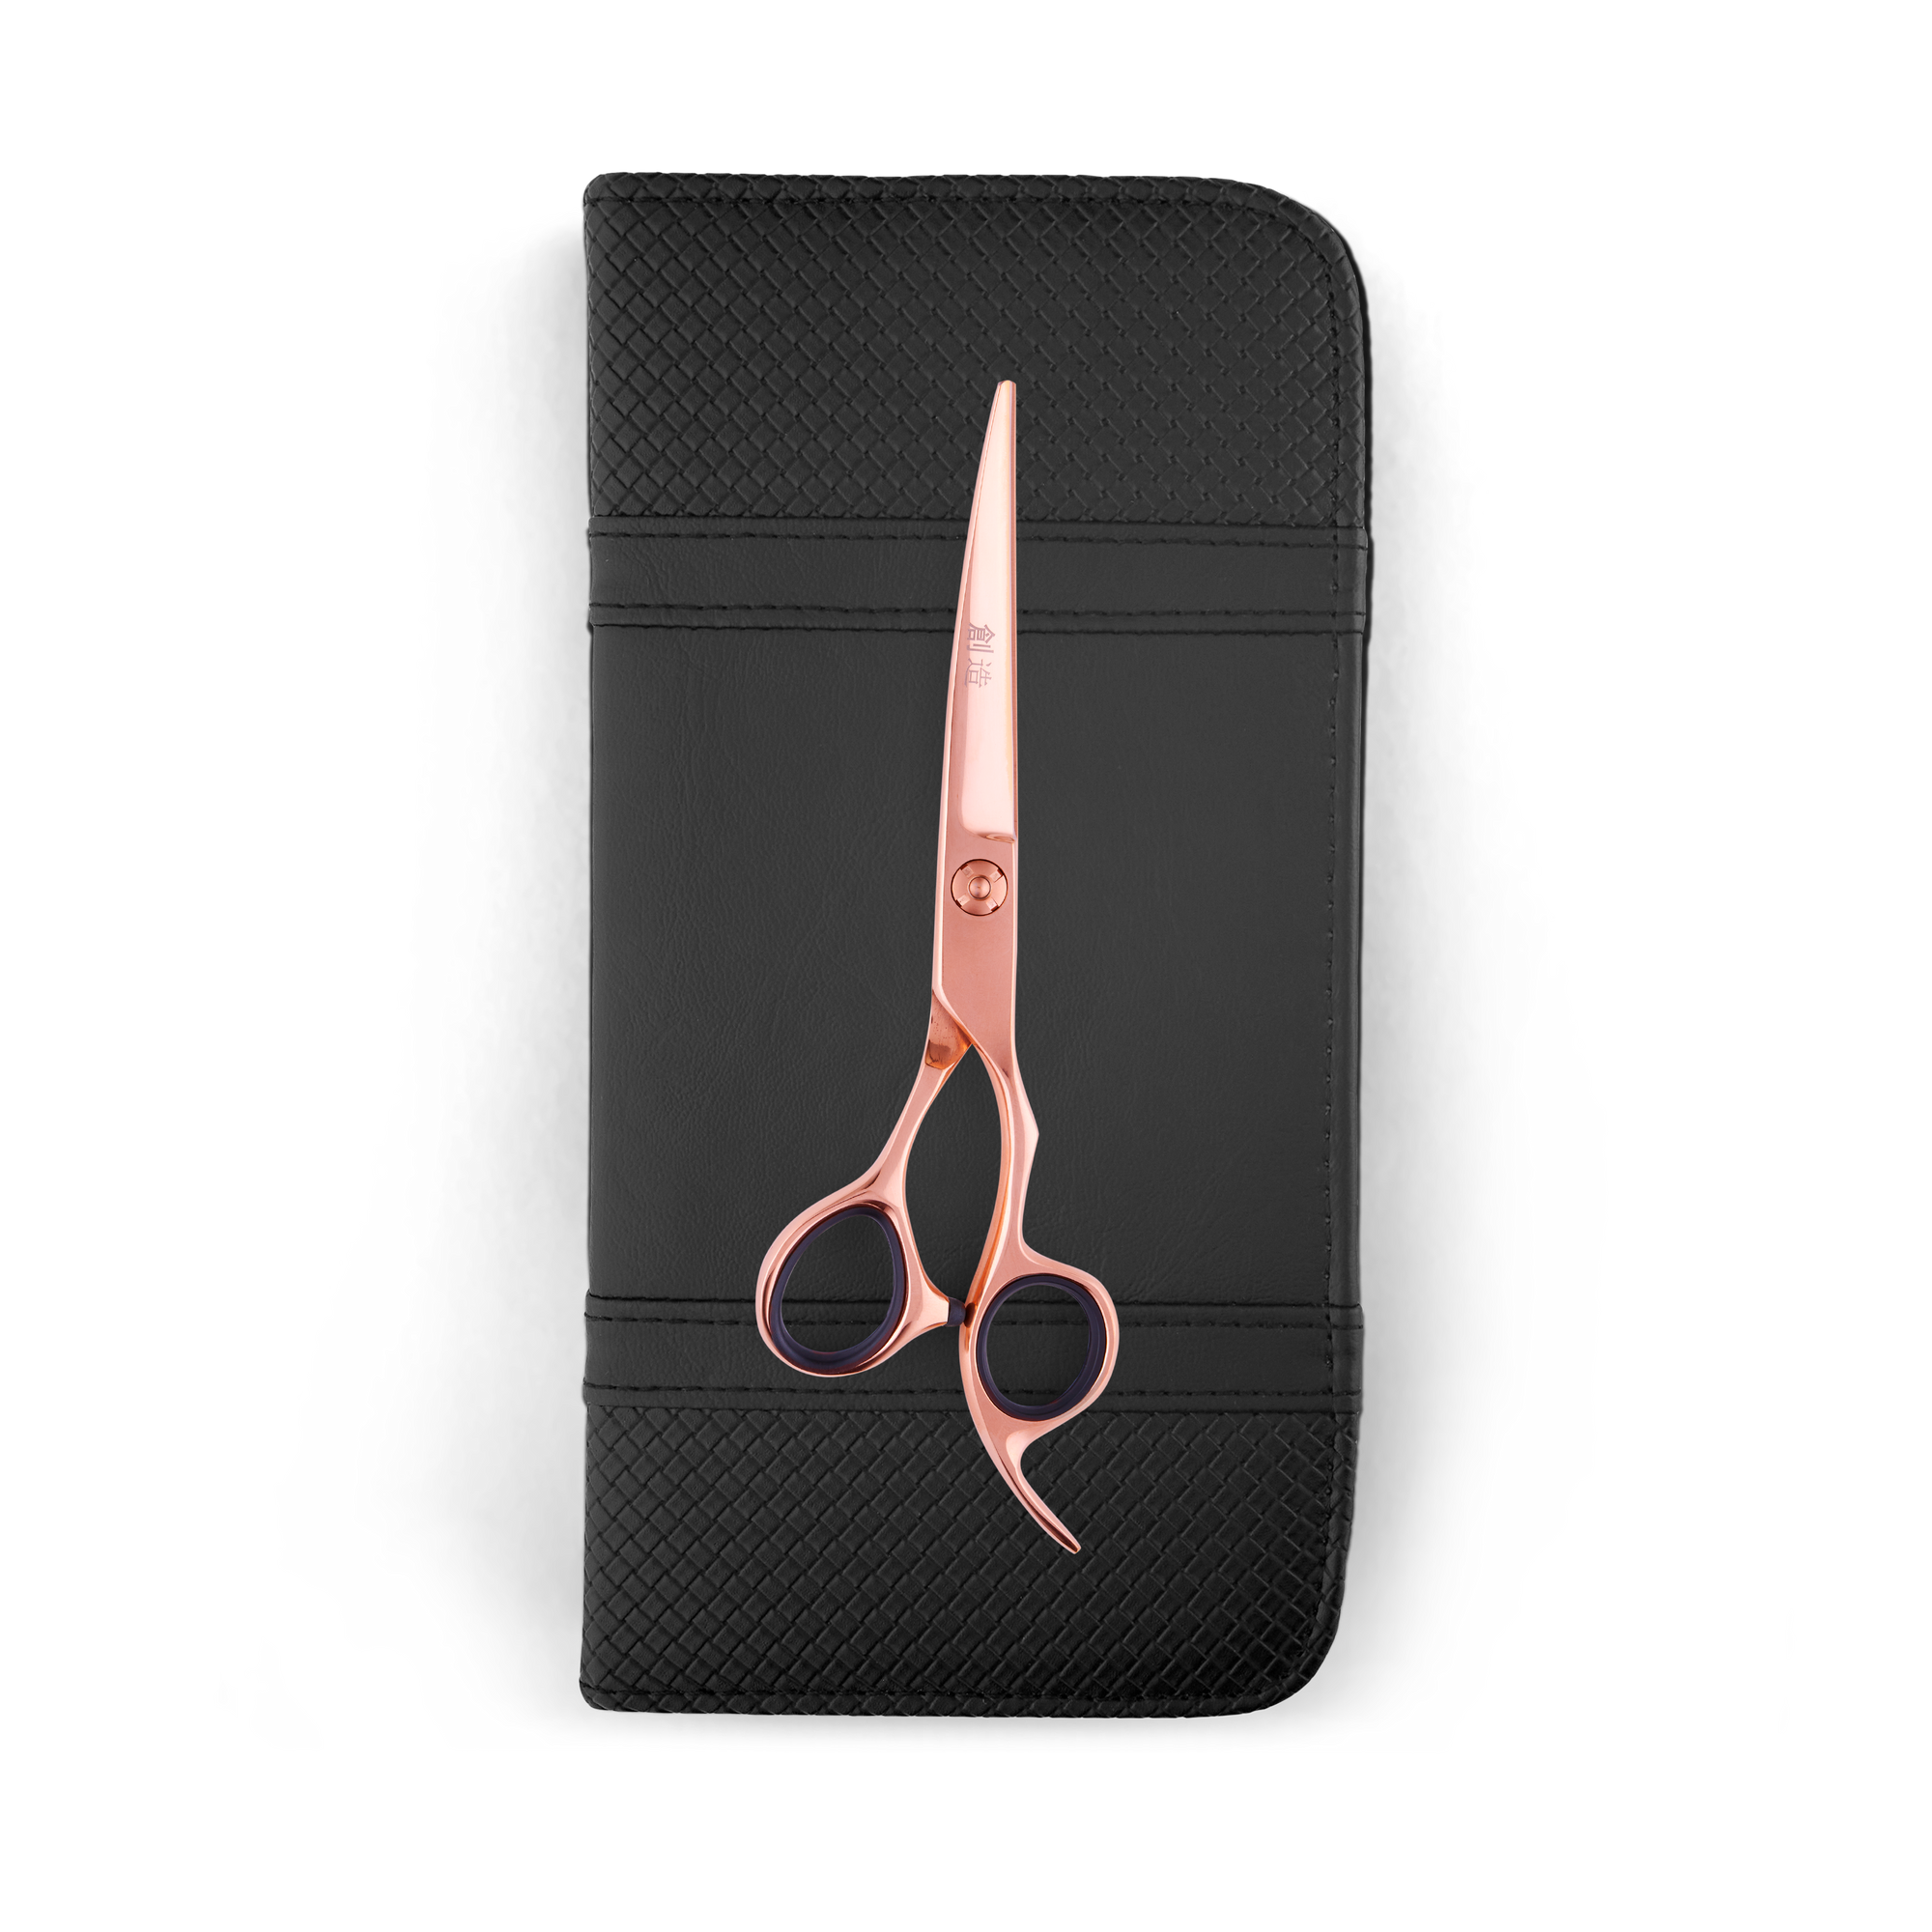 Curved 6" Rose Gold Curved Dog Grooming Scissor (6557544284194)